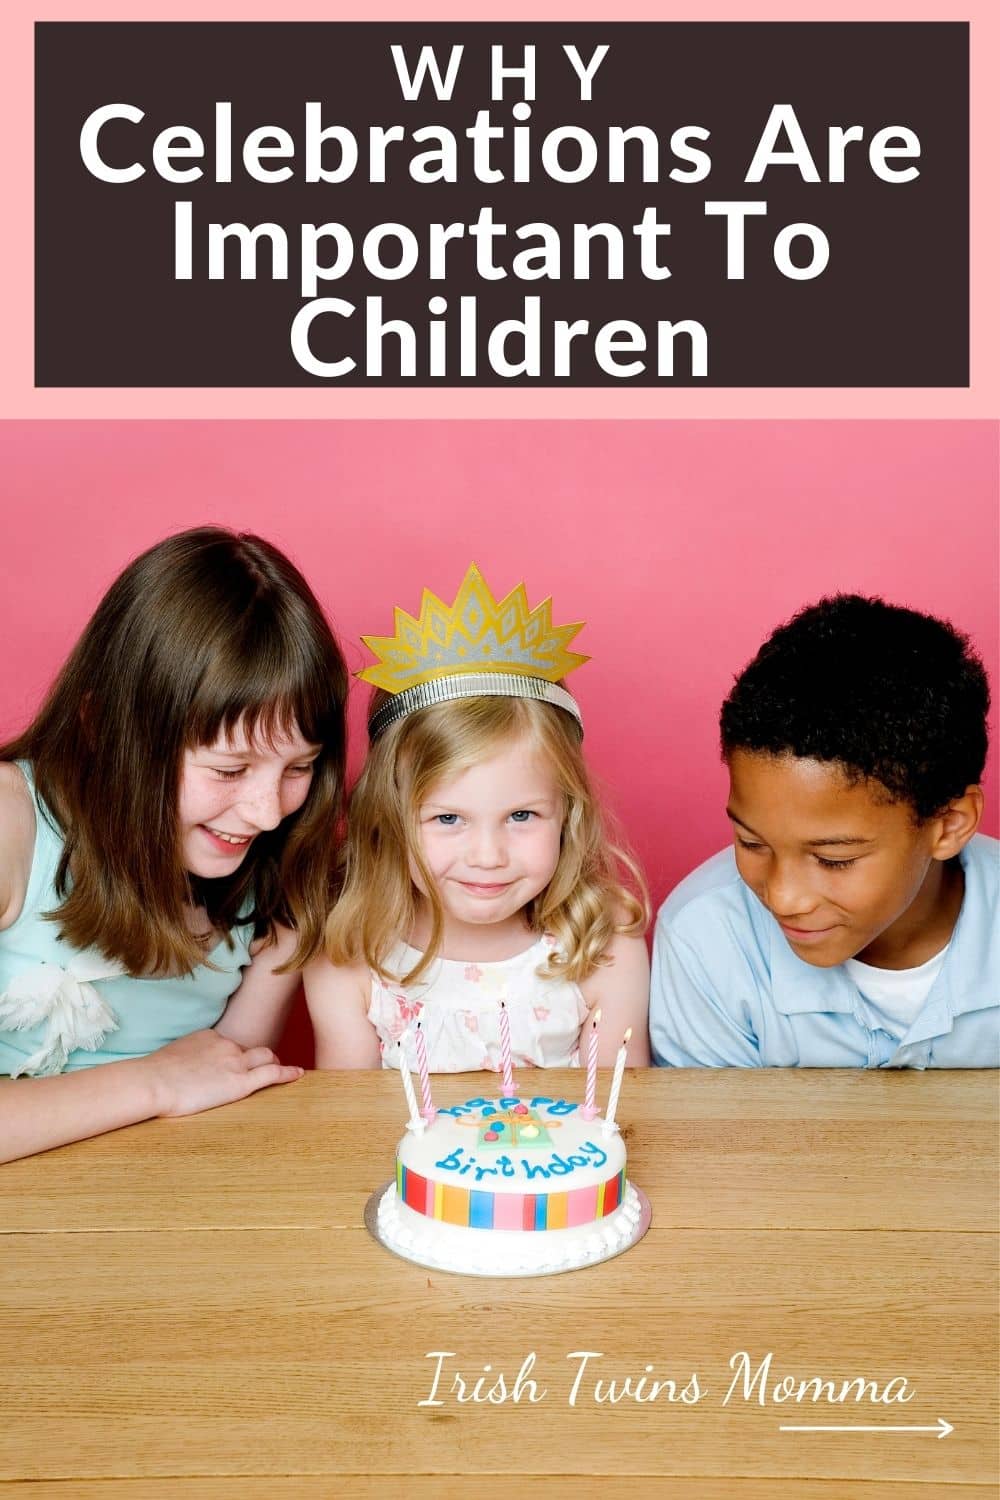 Why Celebrations Are Important To Children